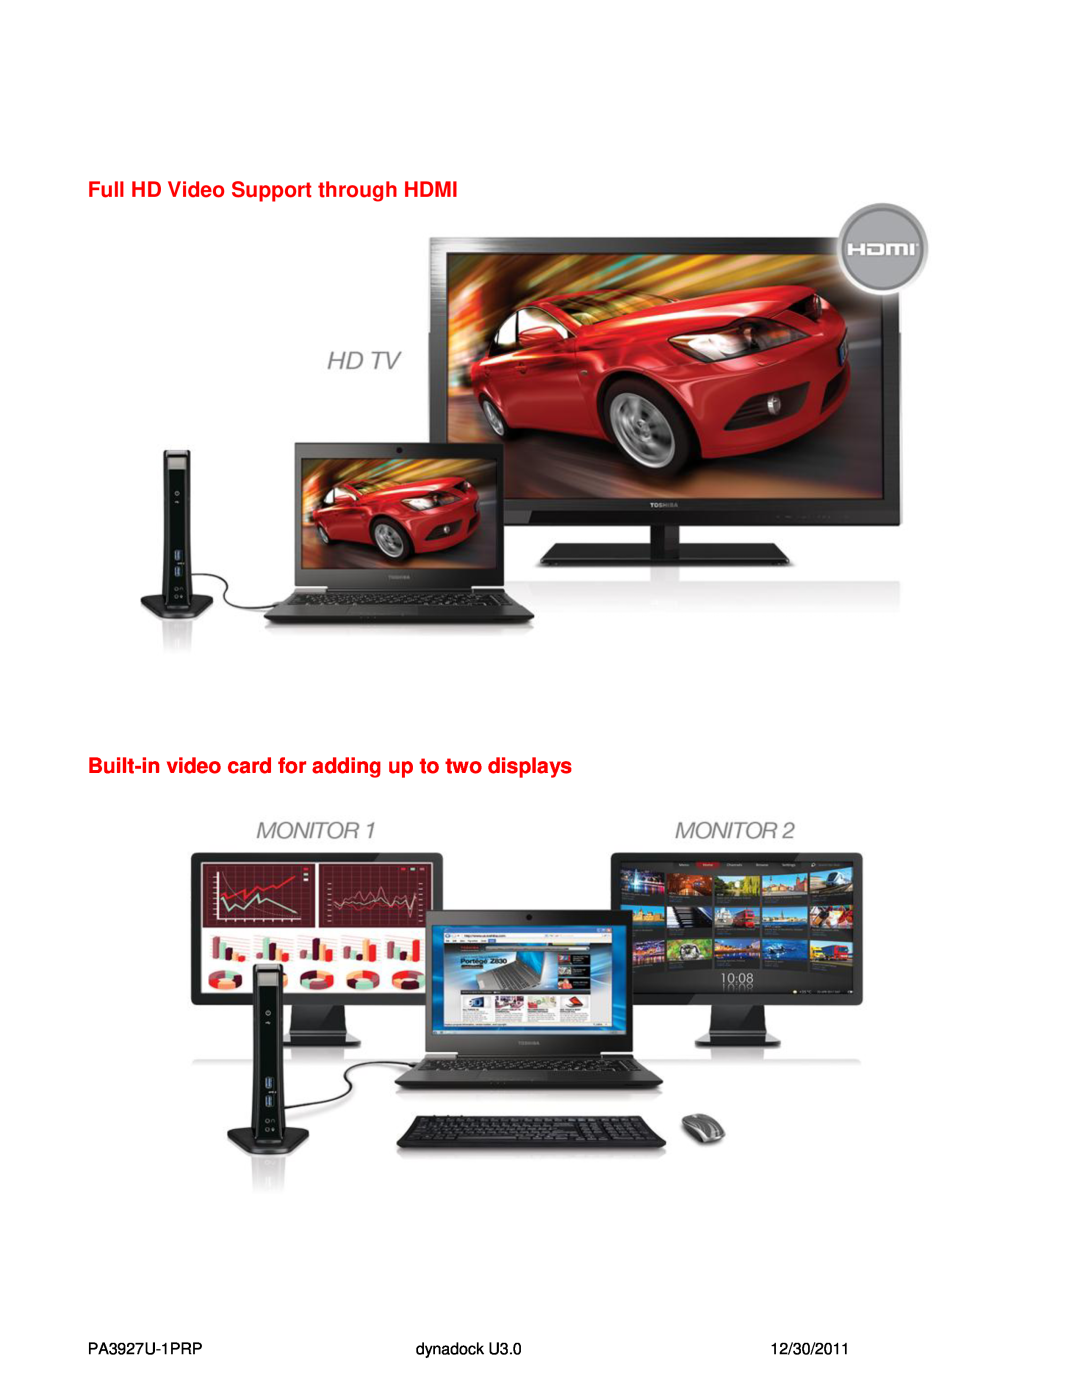 Toshiba PA3927U1PRP Full HD Video Support through HDMI, Built-in video card for adding up to two displays, PA3927U-1PRP 